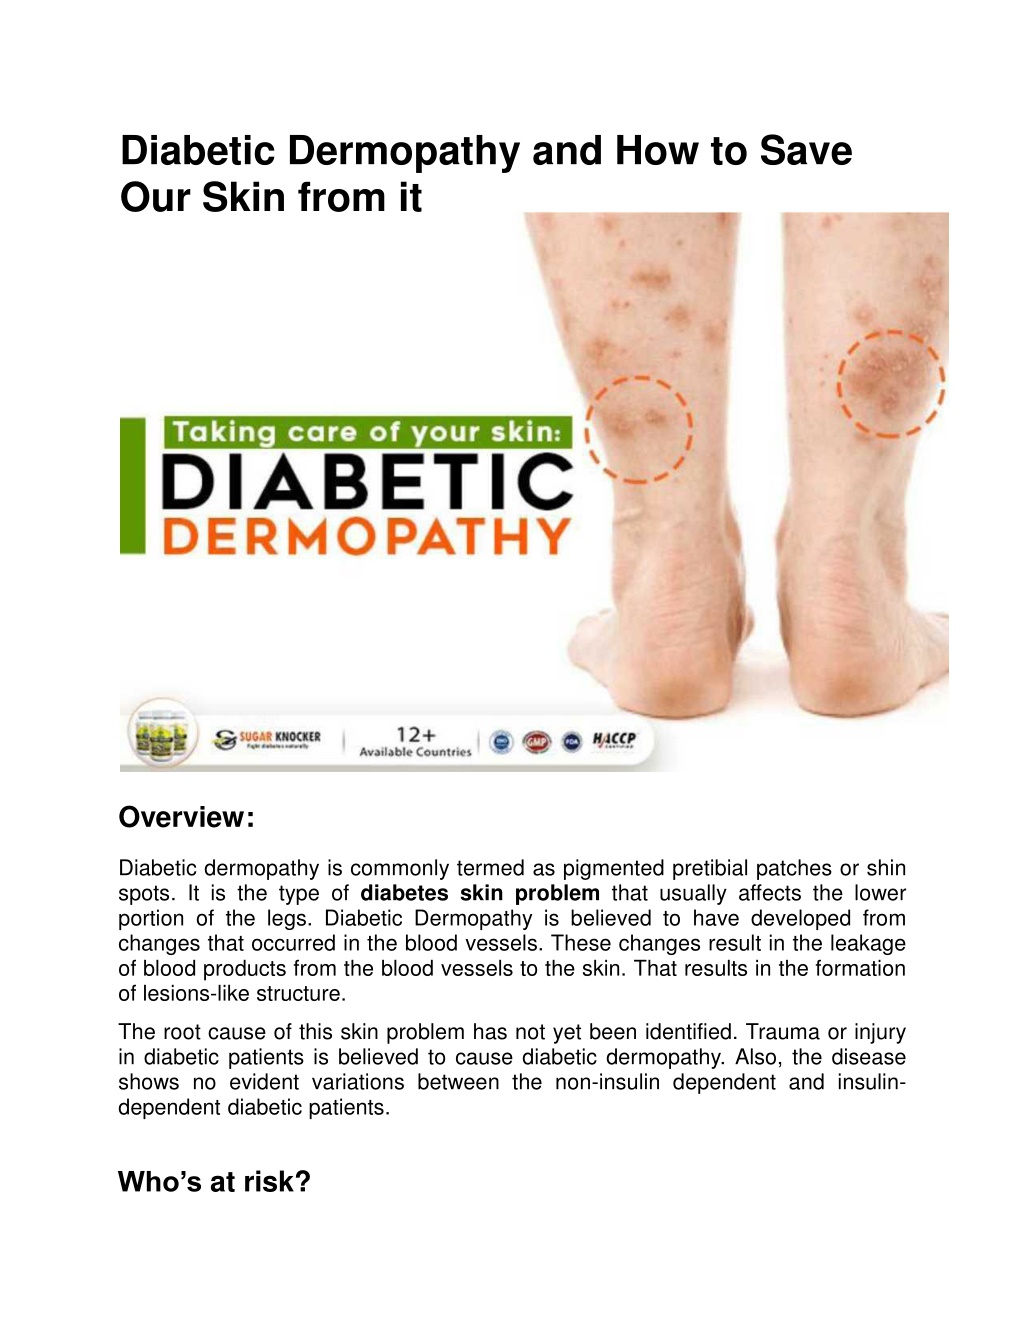 Ppt Diabetic Dermopathy And How To Save Our Skin From It Powerpoint